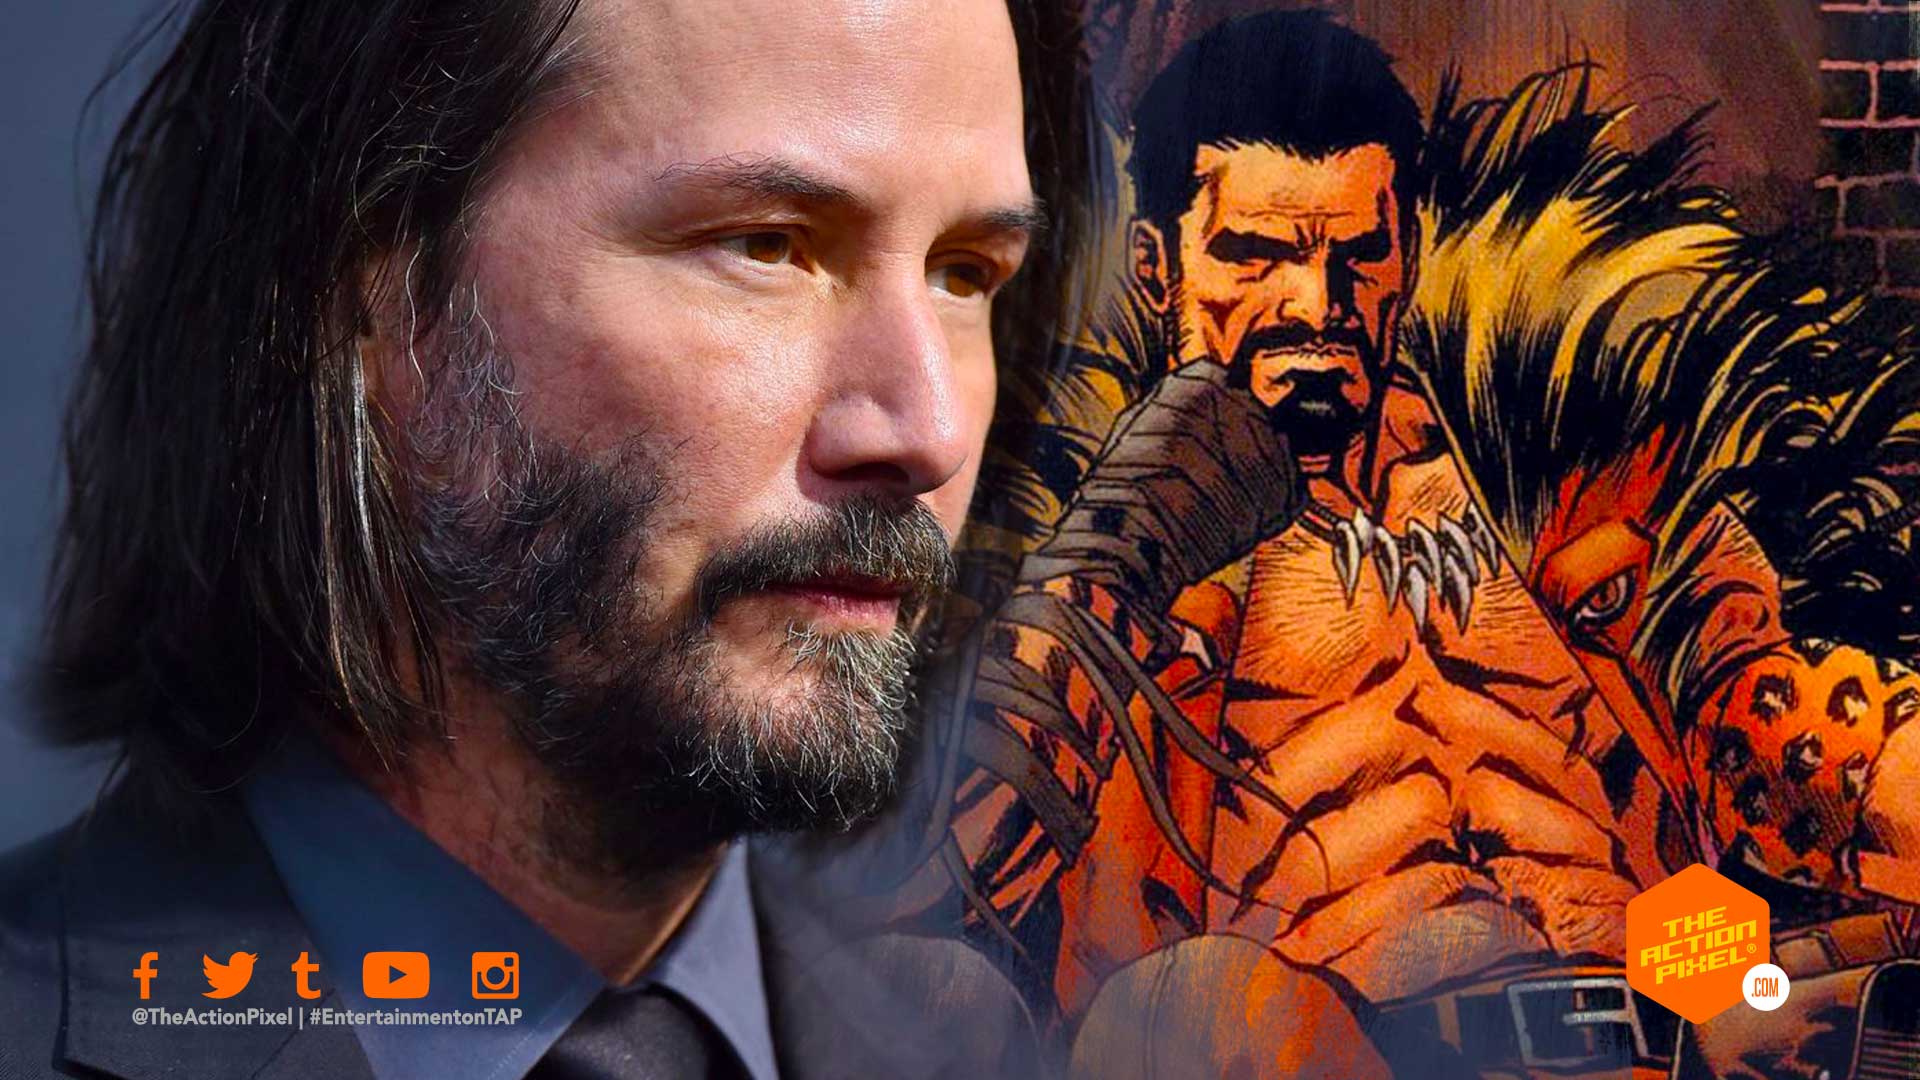 keanu reeves, kraven, sony pictures, the action pixel, entertainment on tap, marvel studios, kraven, sony pictures, spiderverse, entertainment on tap ,featured,